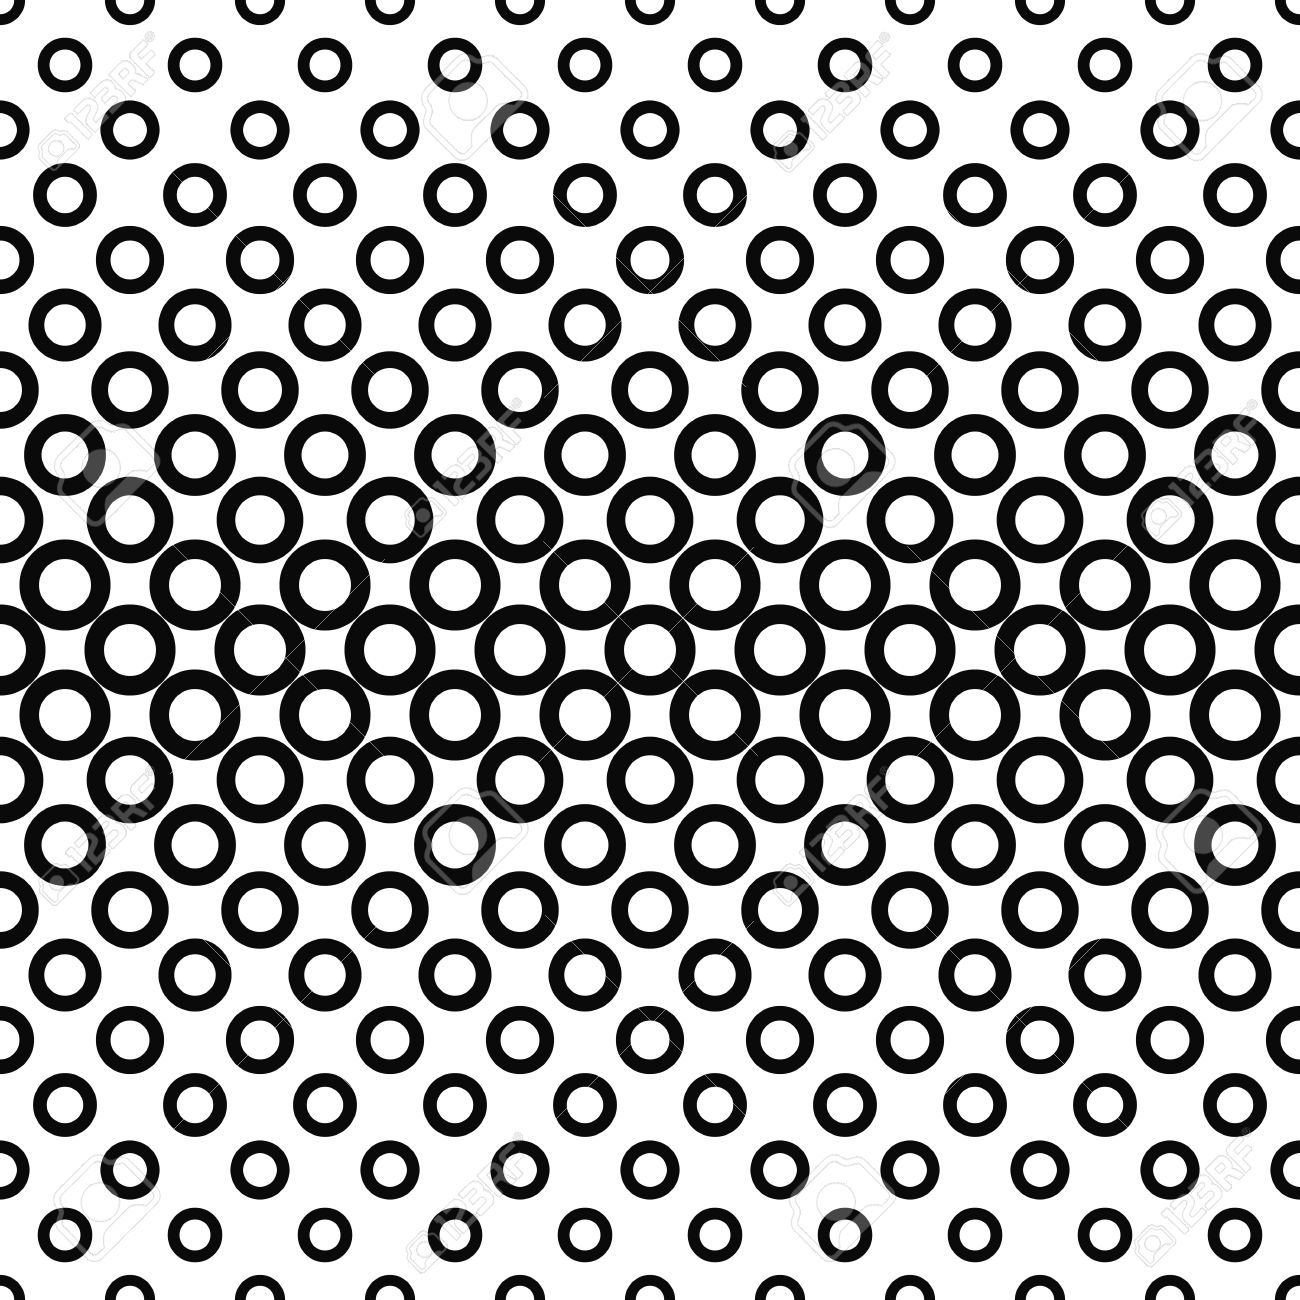 Free clipart circle background black and white.